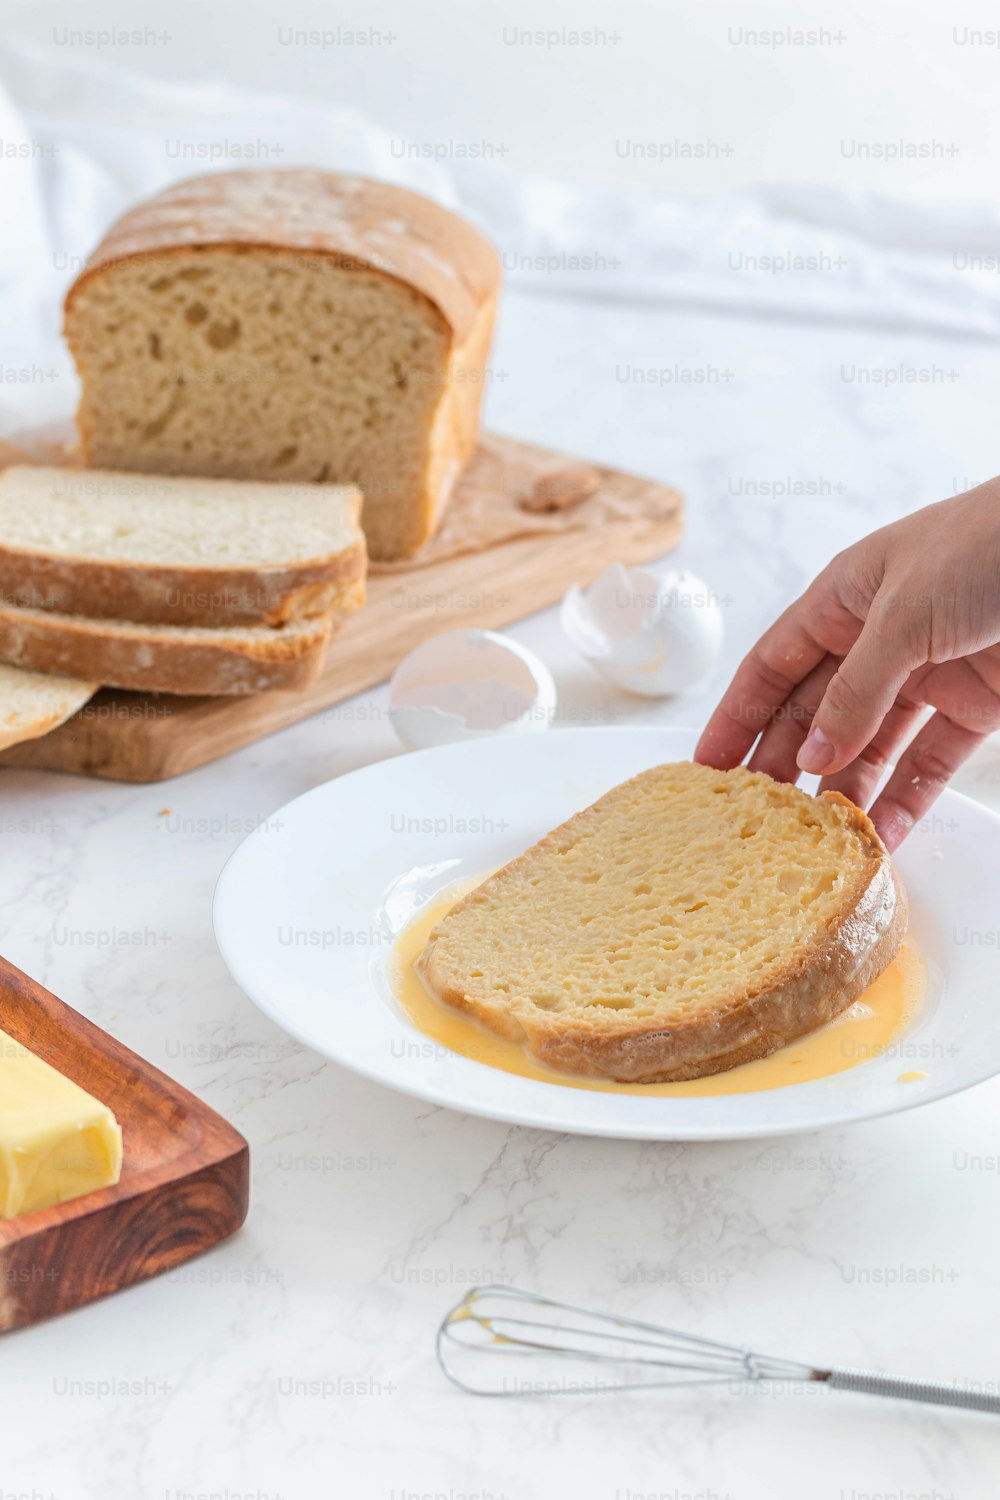 a person is spreading butter on a piece of bread